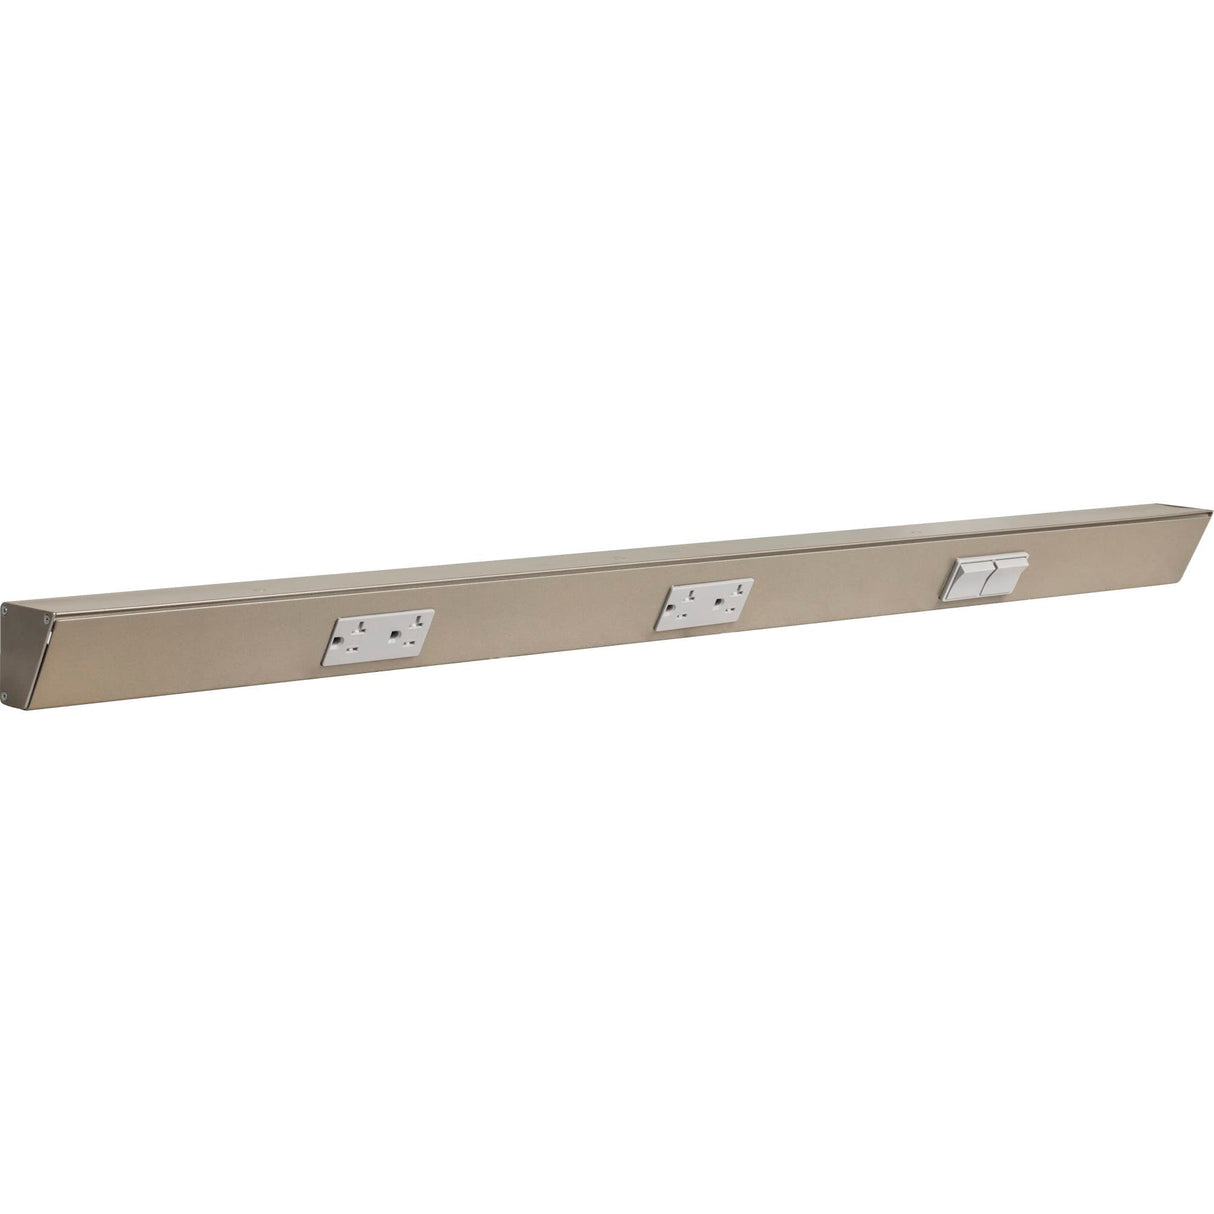 Task Lighting TRS36-3G-SN-RS 36" TR Switch Series Angle Power Strip, Right Switches, Satin Nickel Finish, Grey Switches and Receptacles